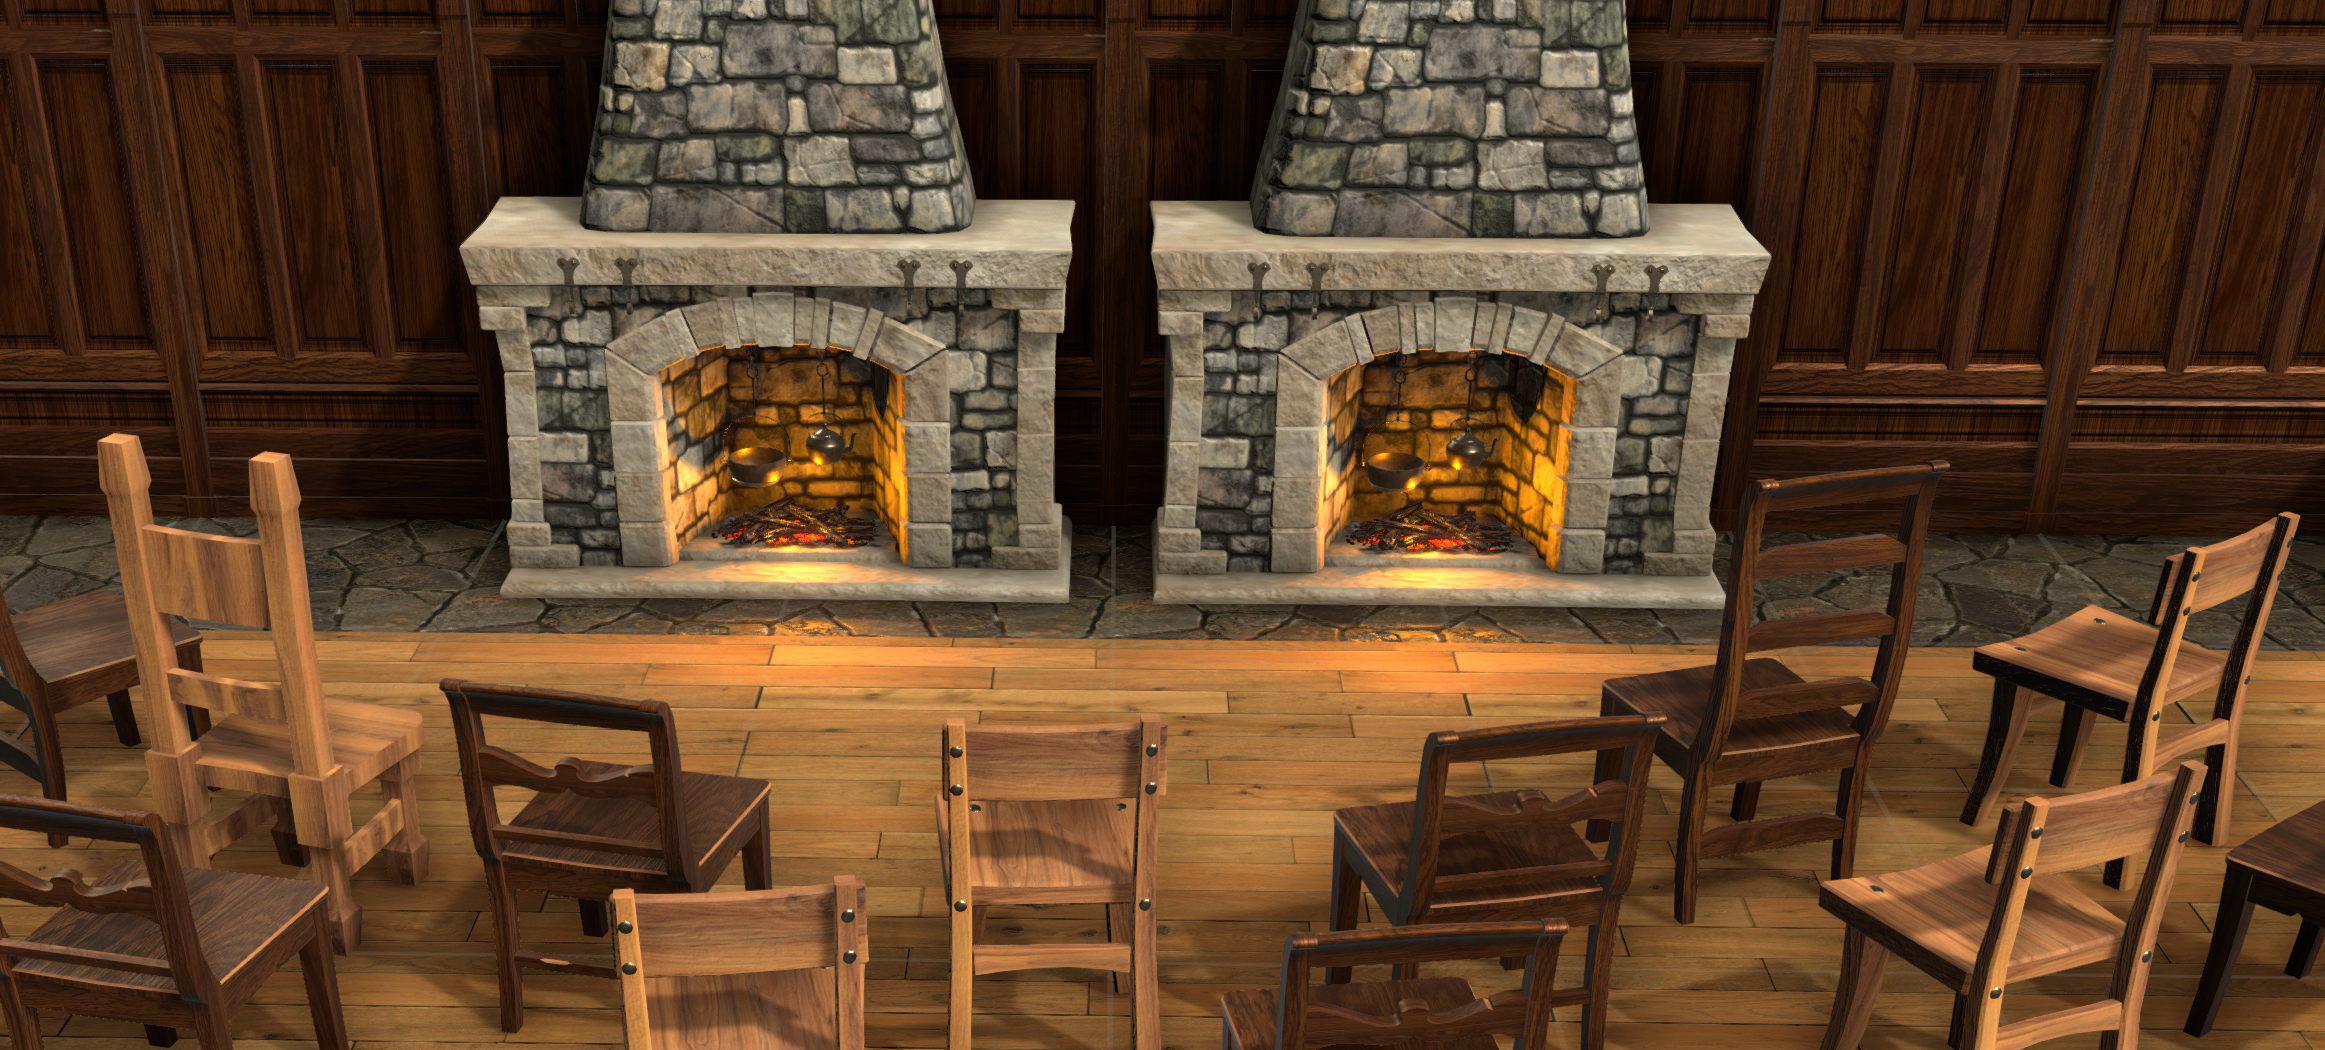 Kenderfoot Hearth Fireplace.png